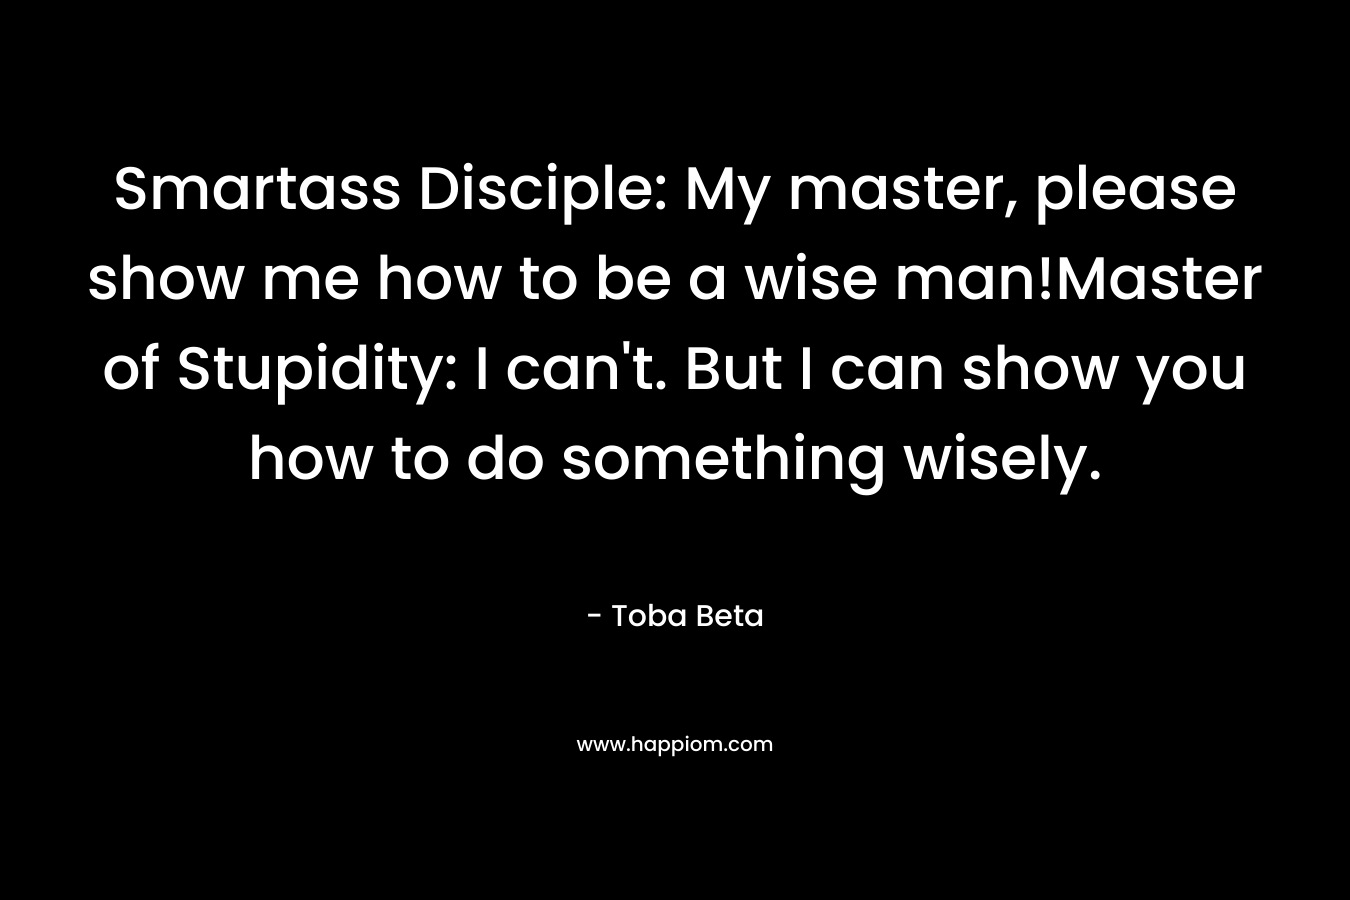 Smartass Disciple: My master, please show me how to be a wise man!Master of Stupidity: I can’t. But I can show you how to do something wisely. – Toba Beta